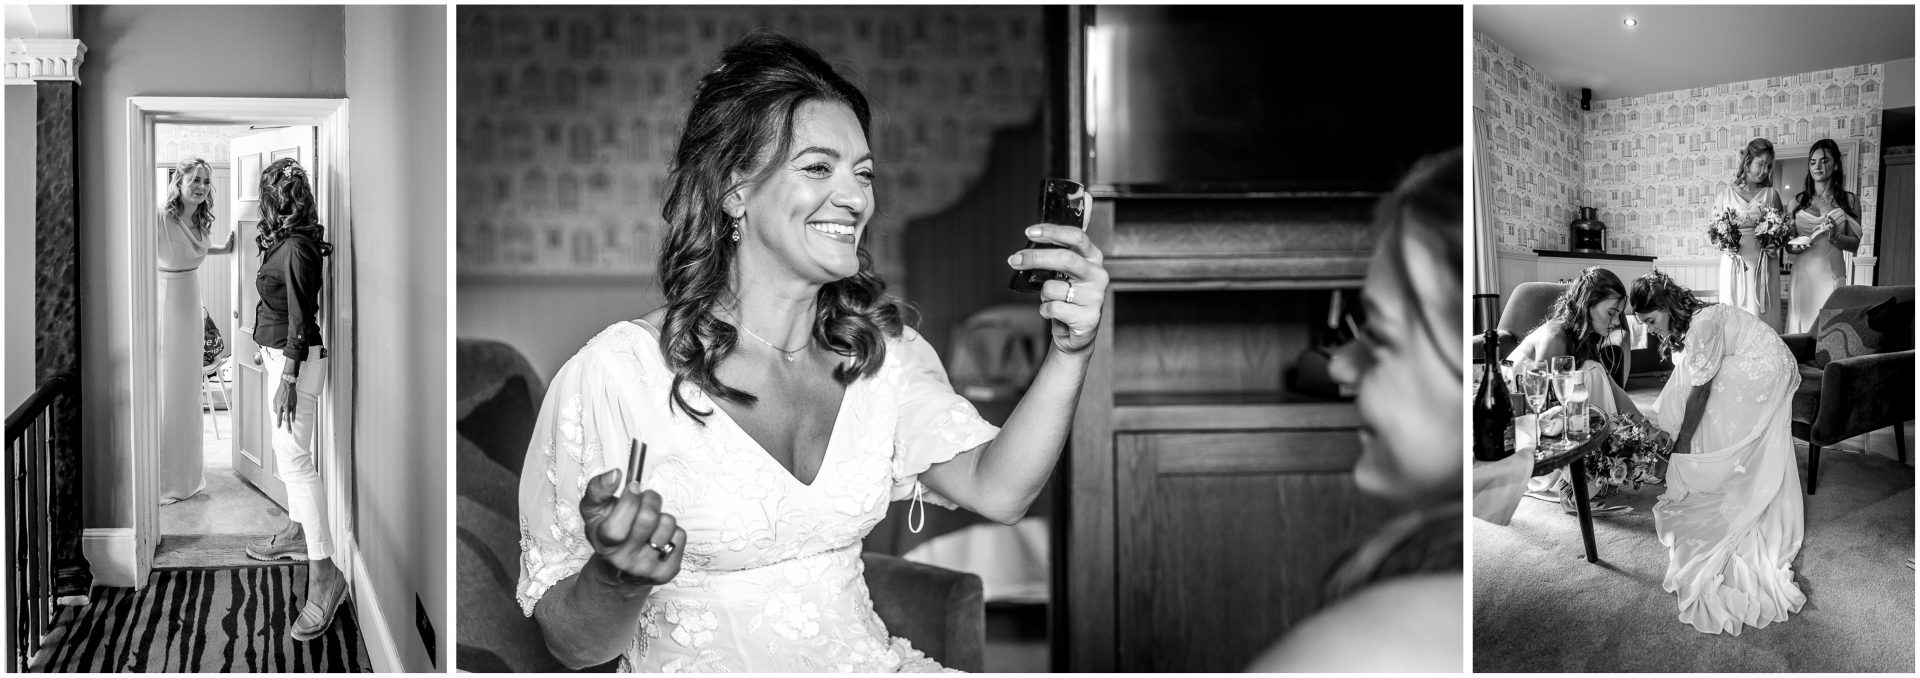 Black and white photos of he bride getting ready on her wedding day